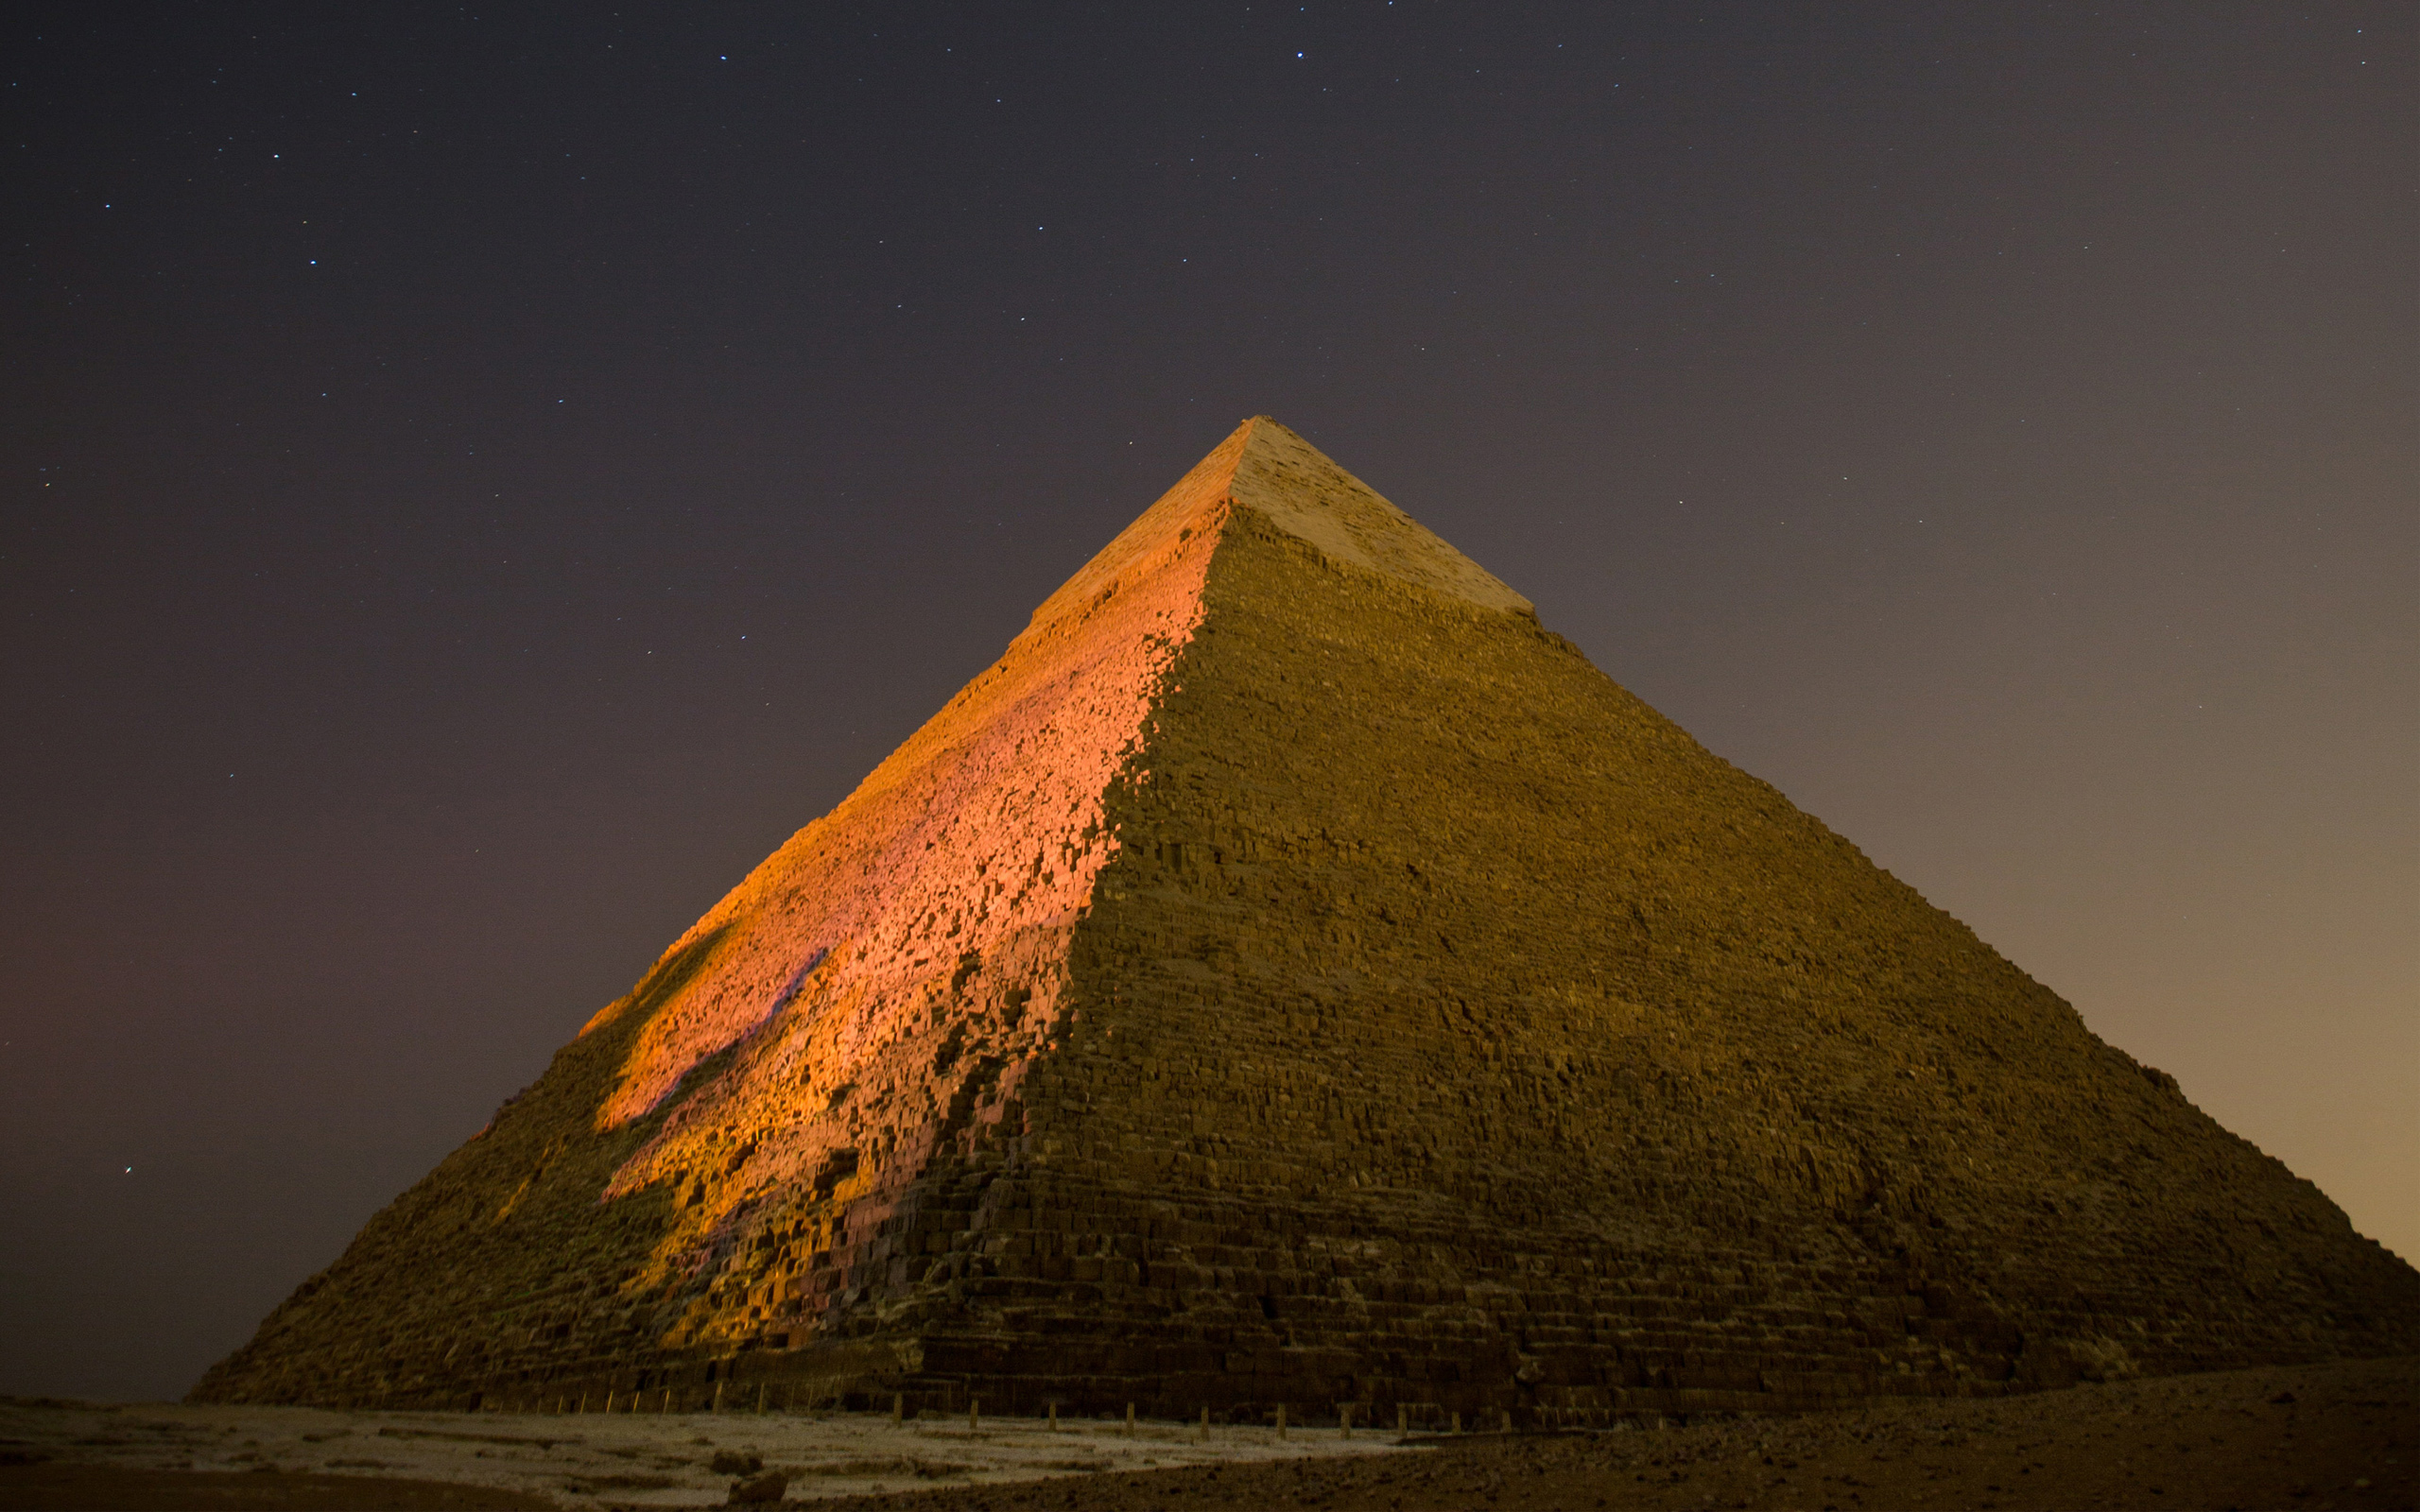 Pyramid 4K wallpaper for your desktop or mobile screen free and easy to download